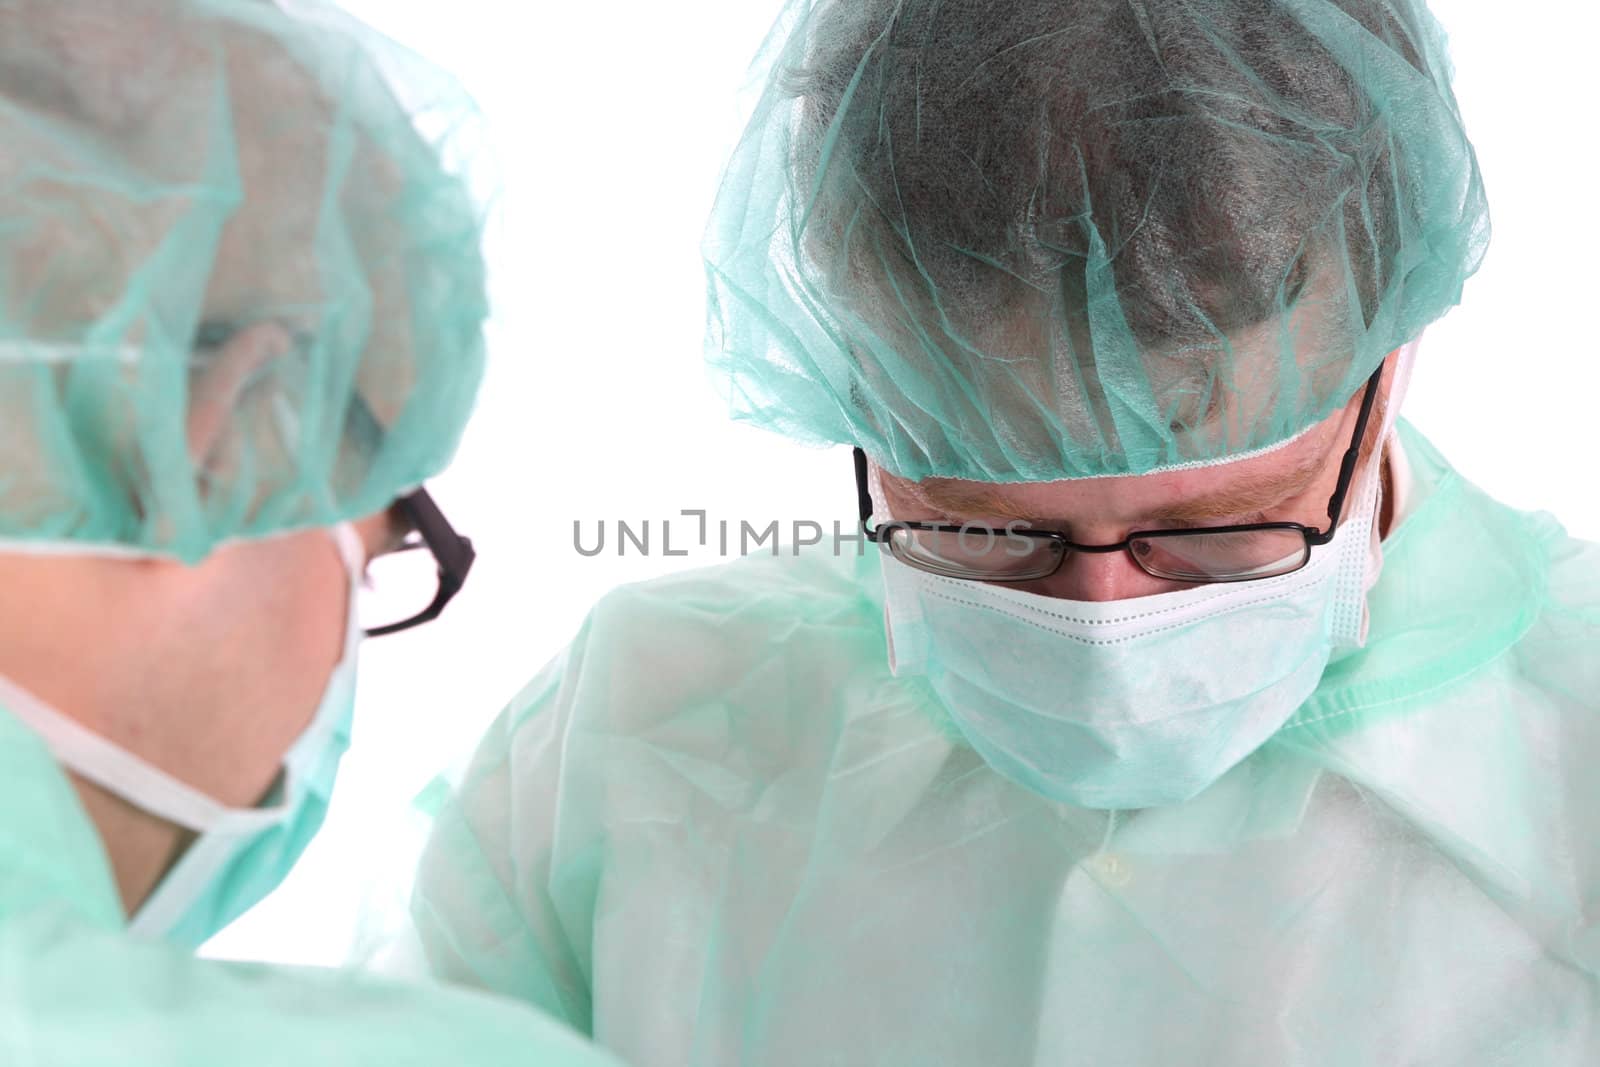 Details two surgeon at work on white background